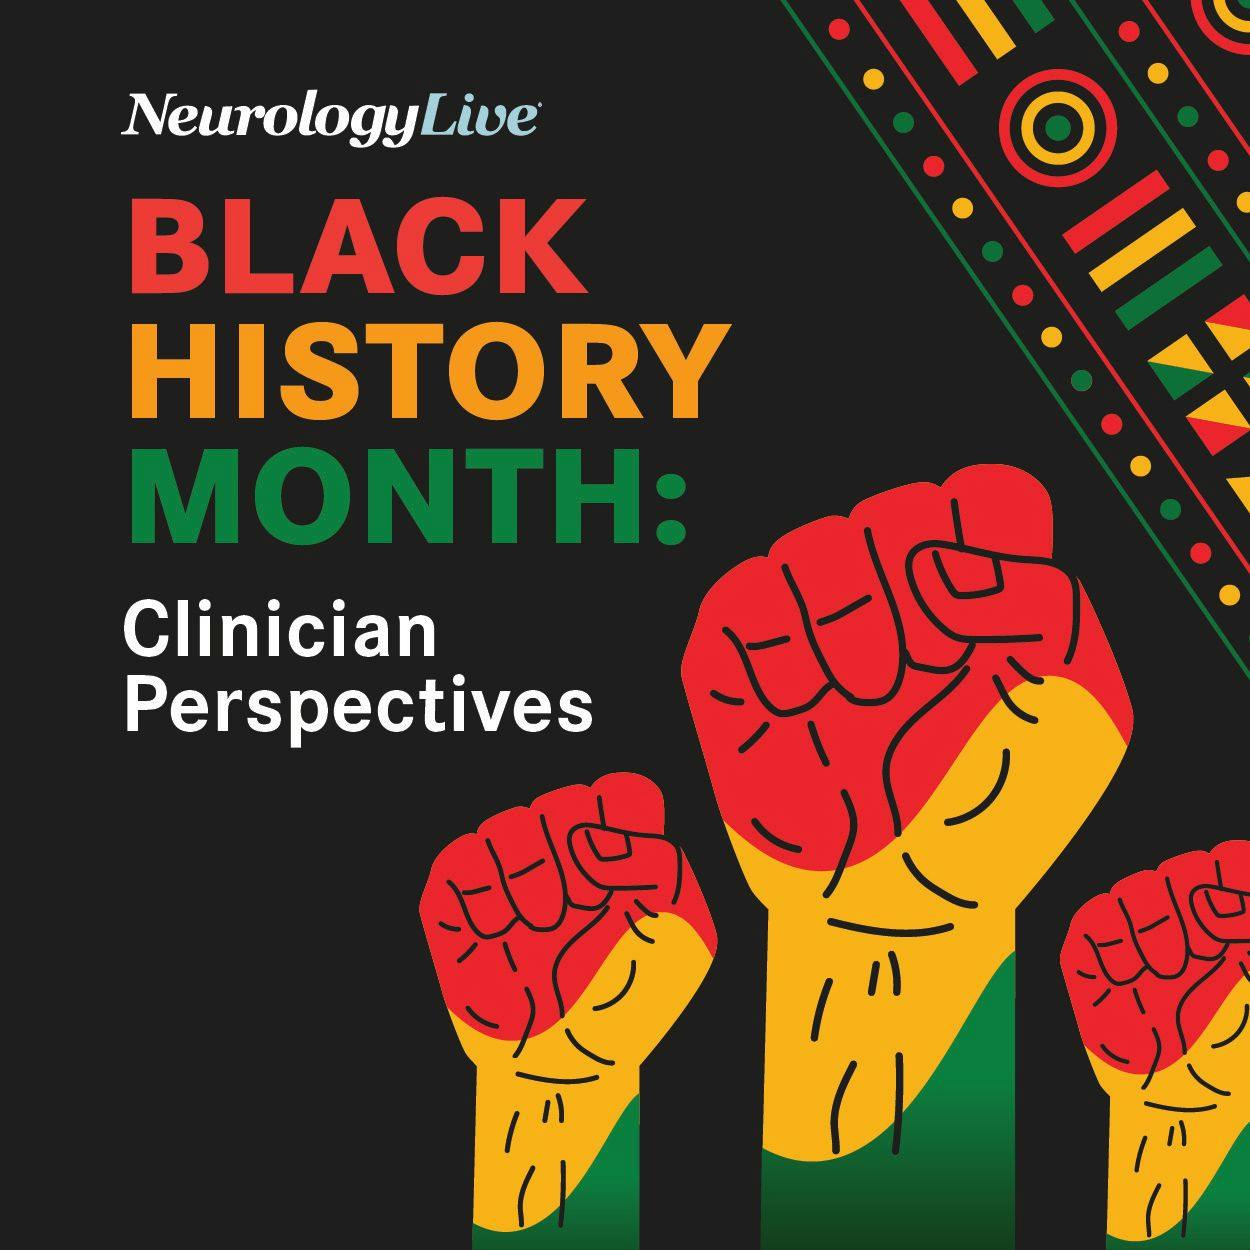 Clinician Perspectives on Black History Month: Part 2